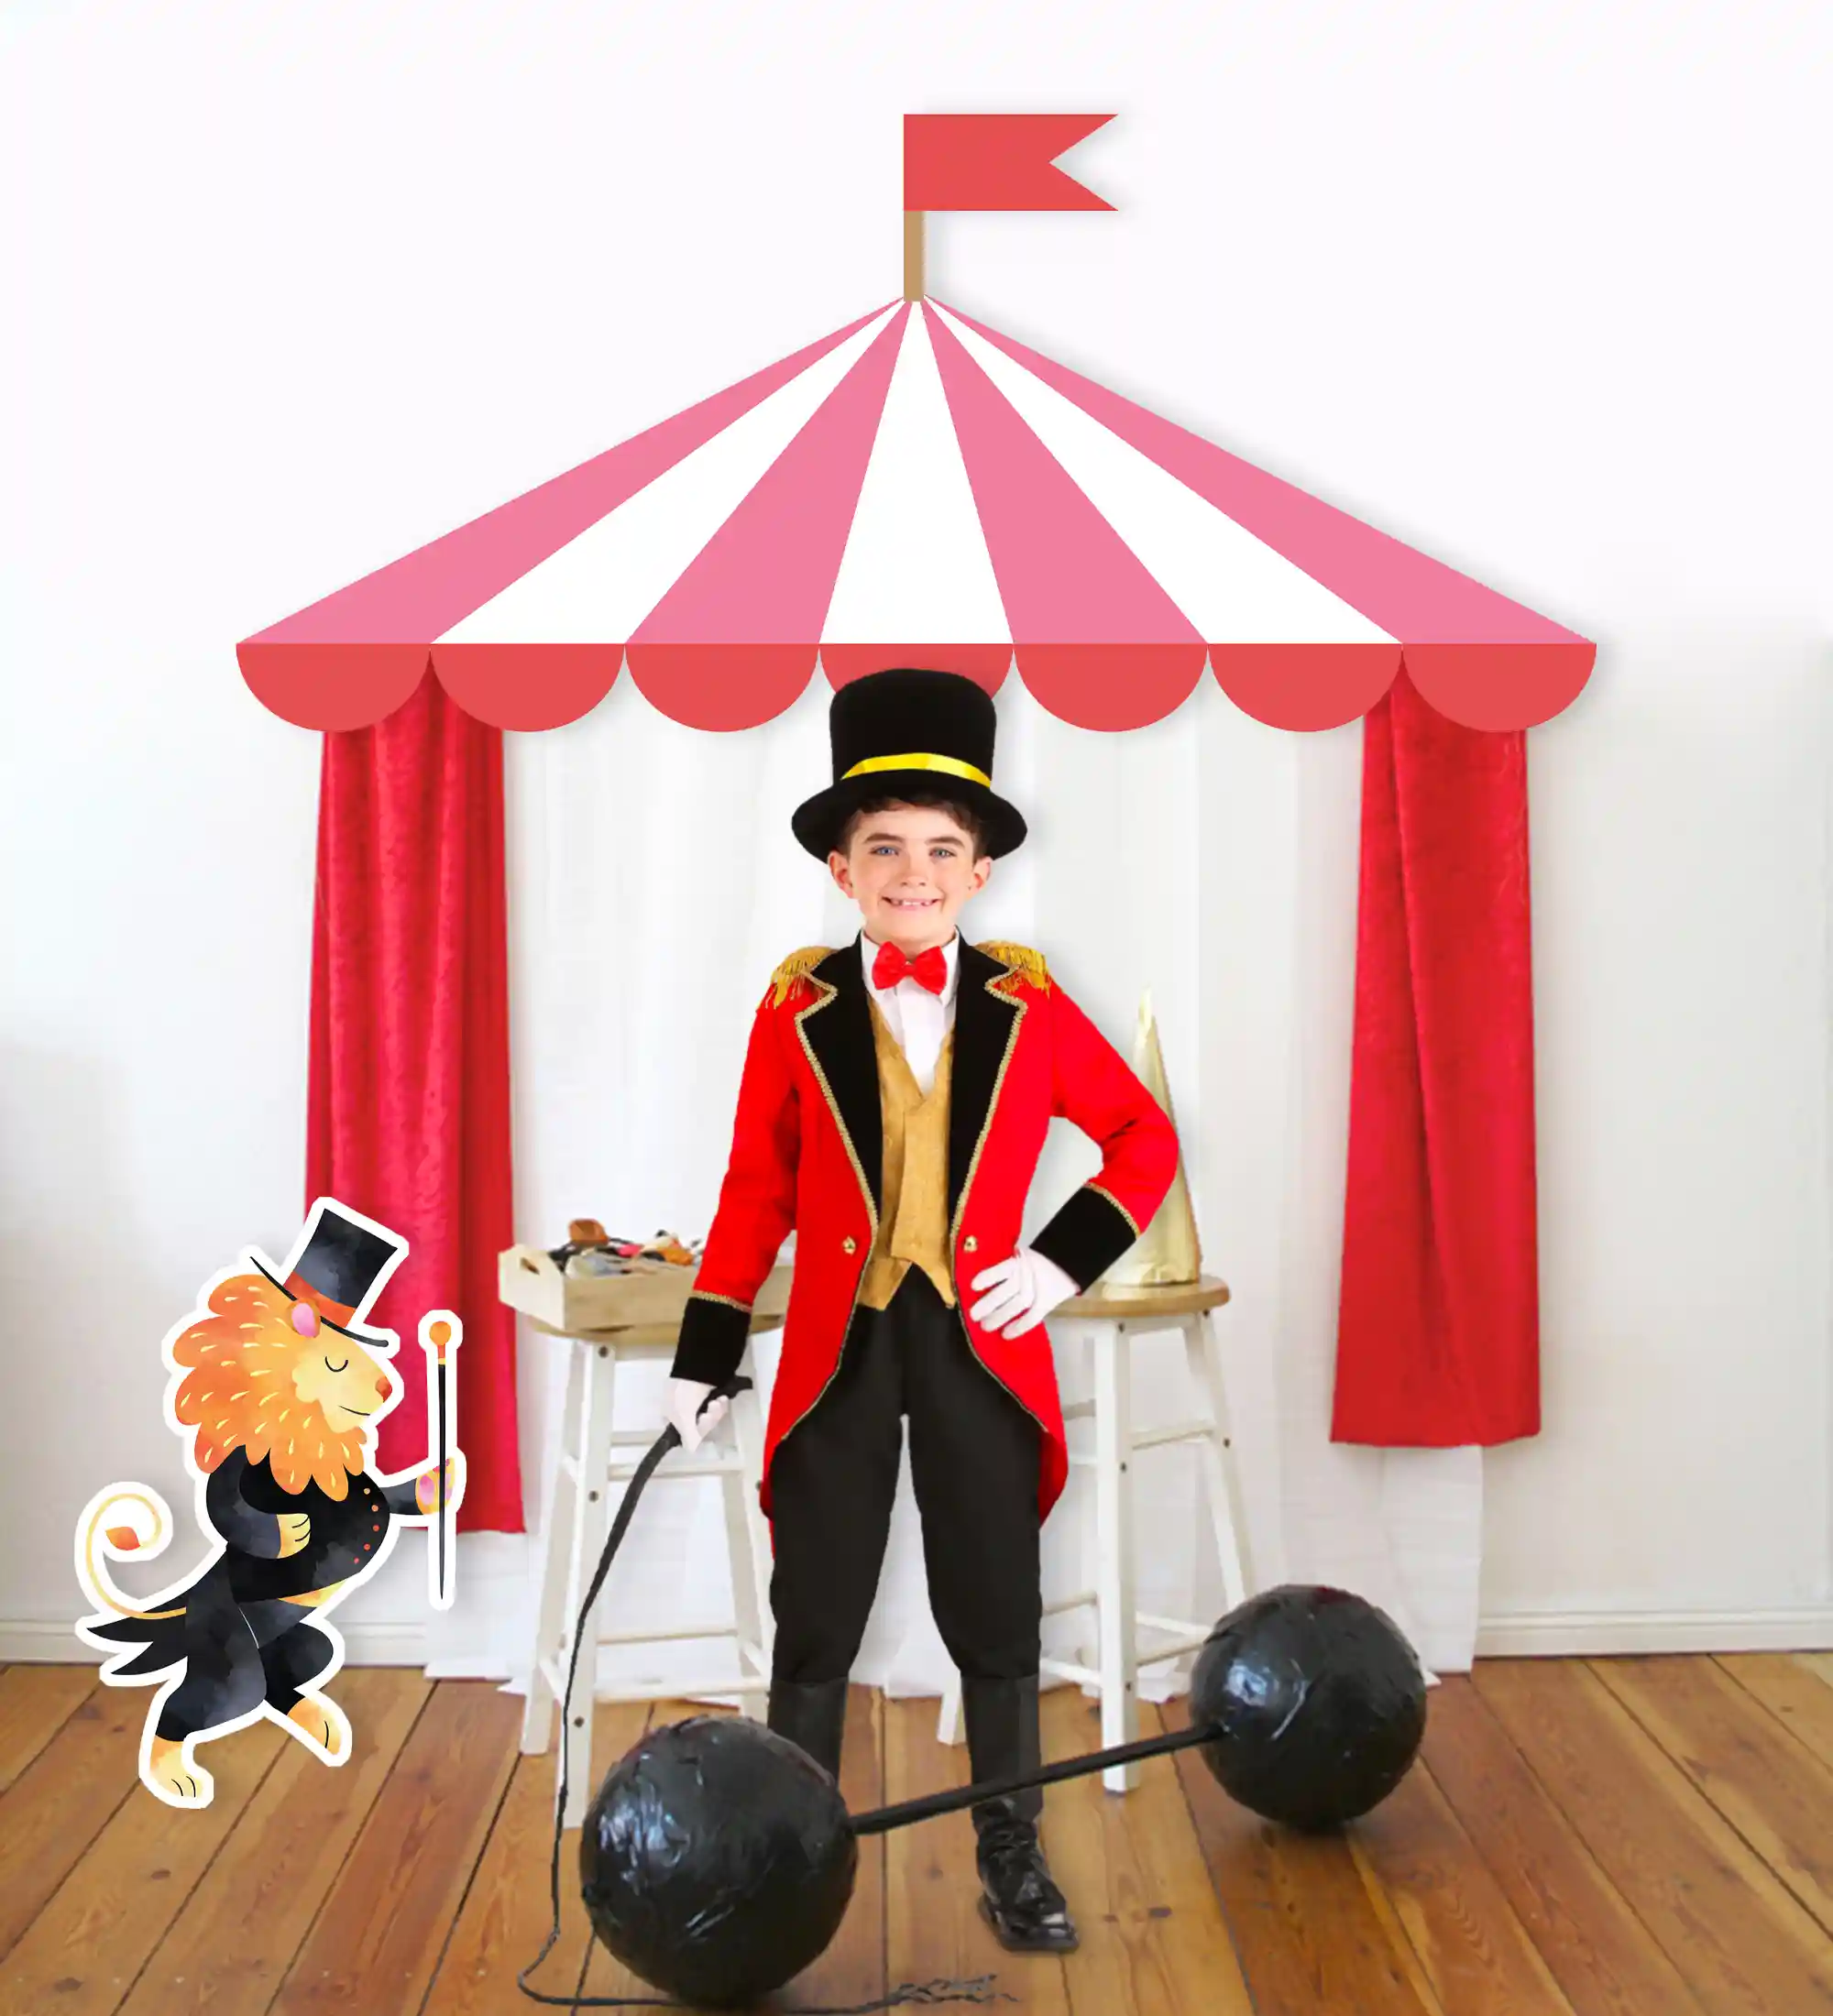 carnival or circus themed photo booth backdrop and props for your next party, carnival, or celebration. Set up a mock circus tent